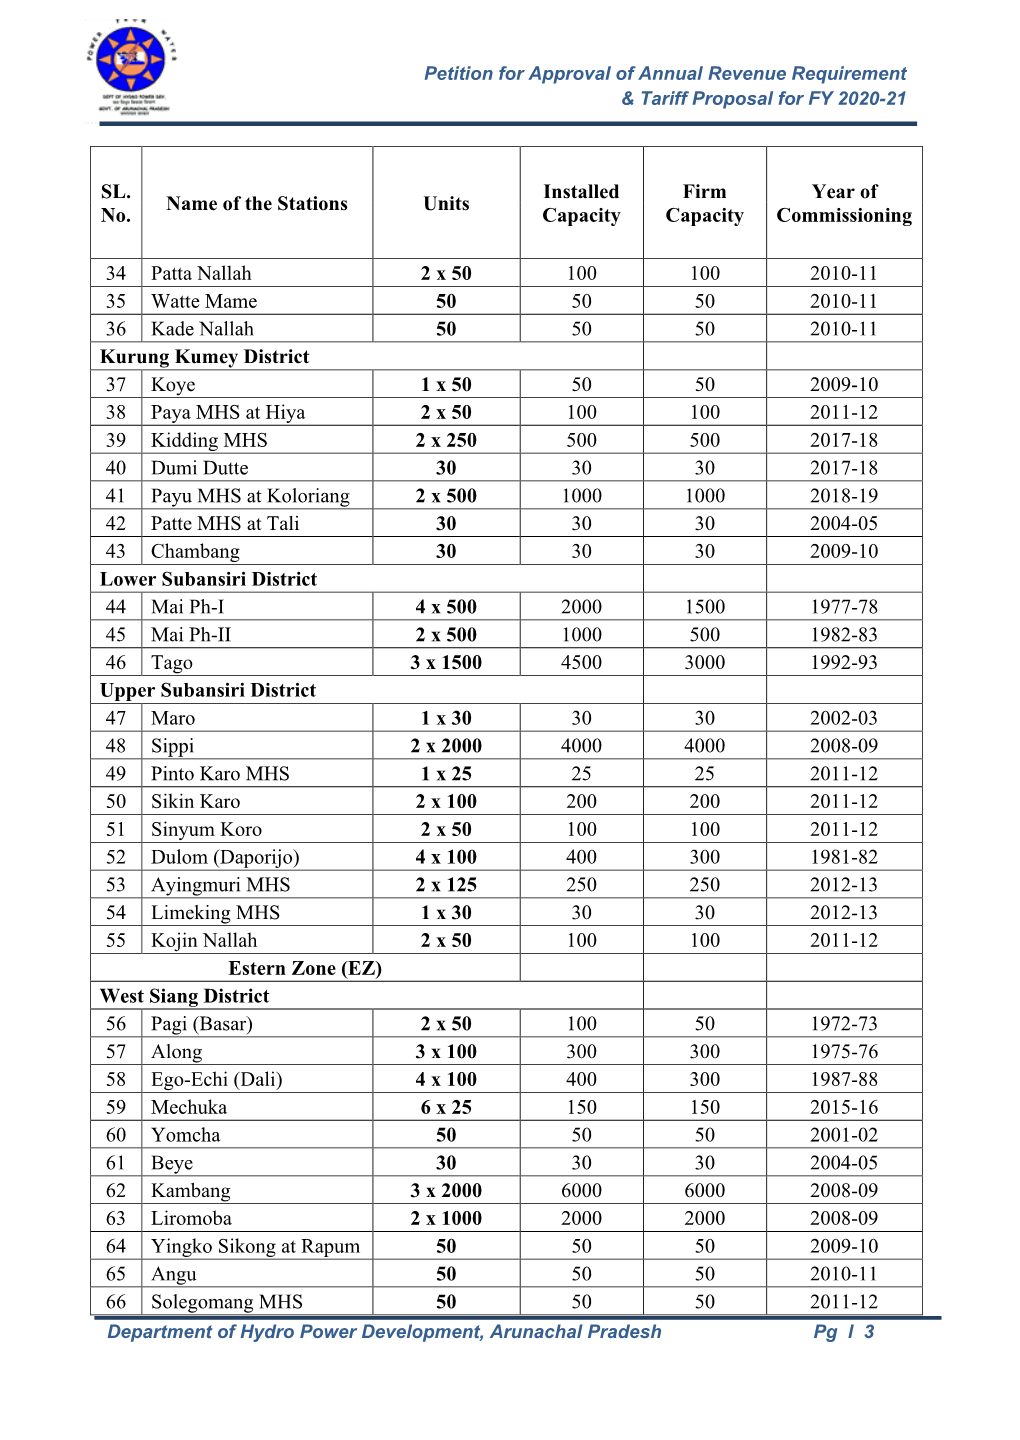 SL. No. Name of the Stations Units Installed Capacity Firm Capacity